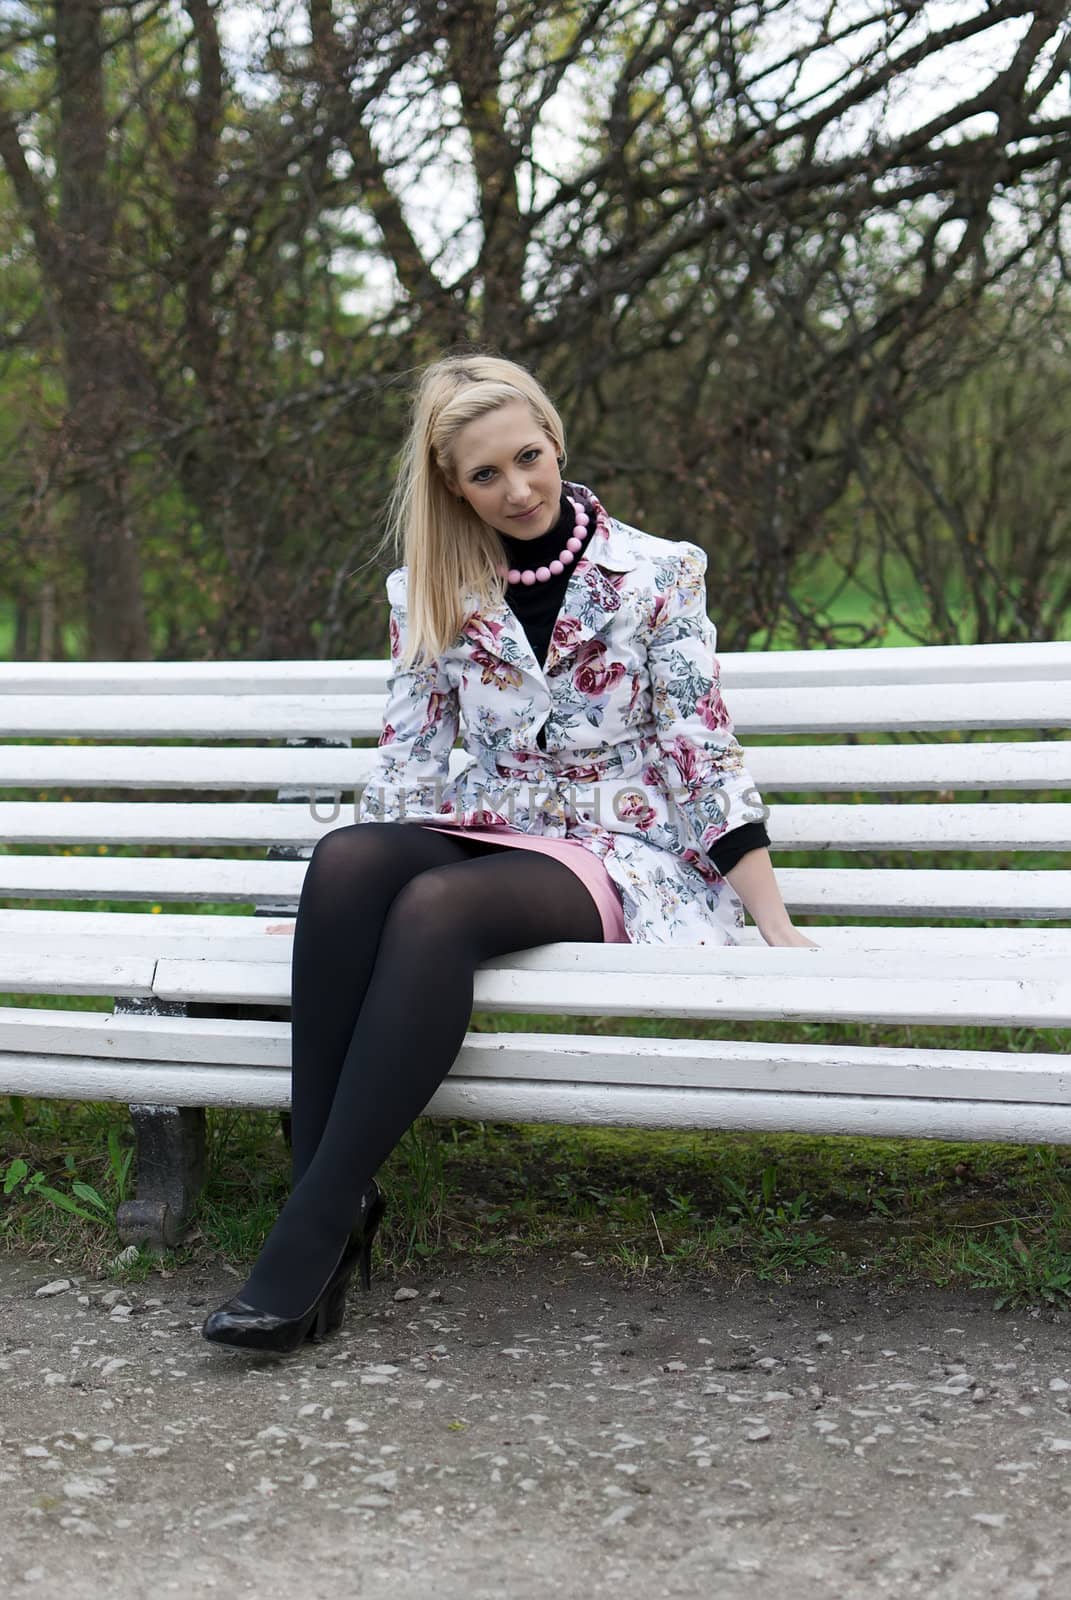 blonde girl sitting on a park bench and smiling